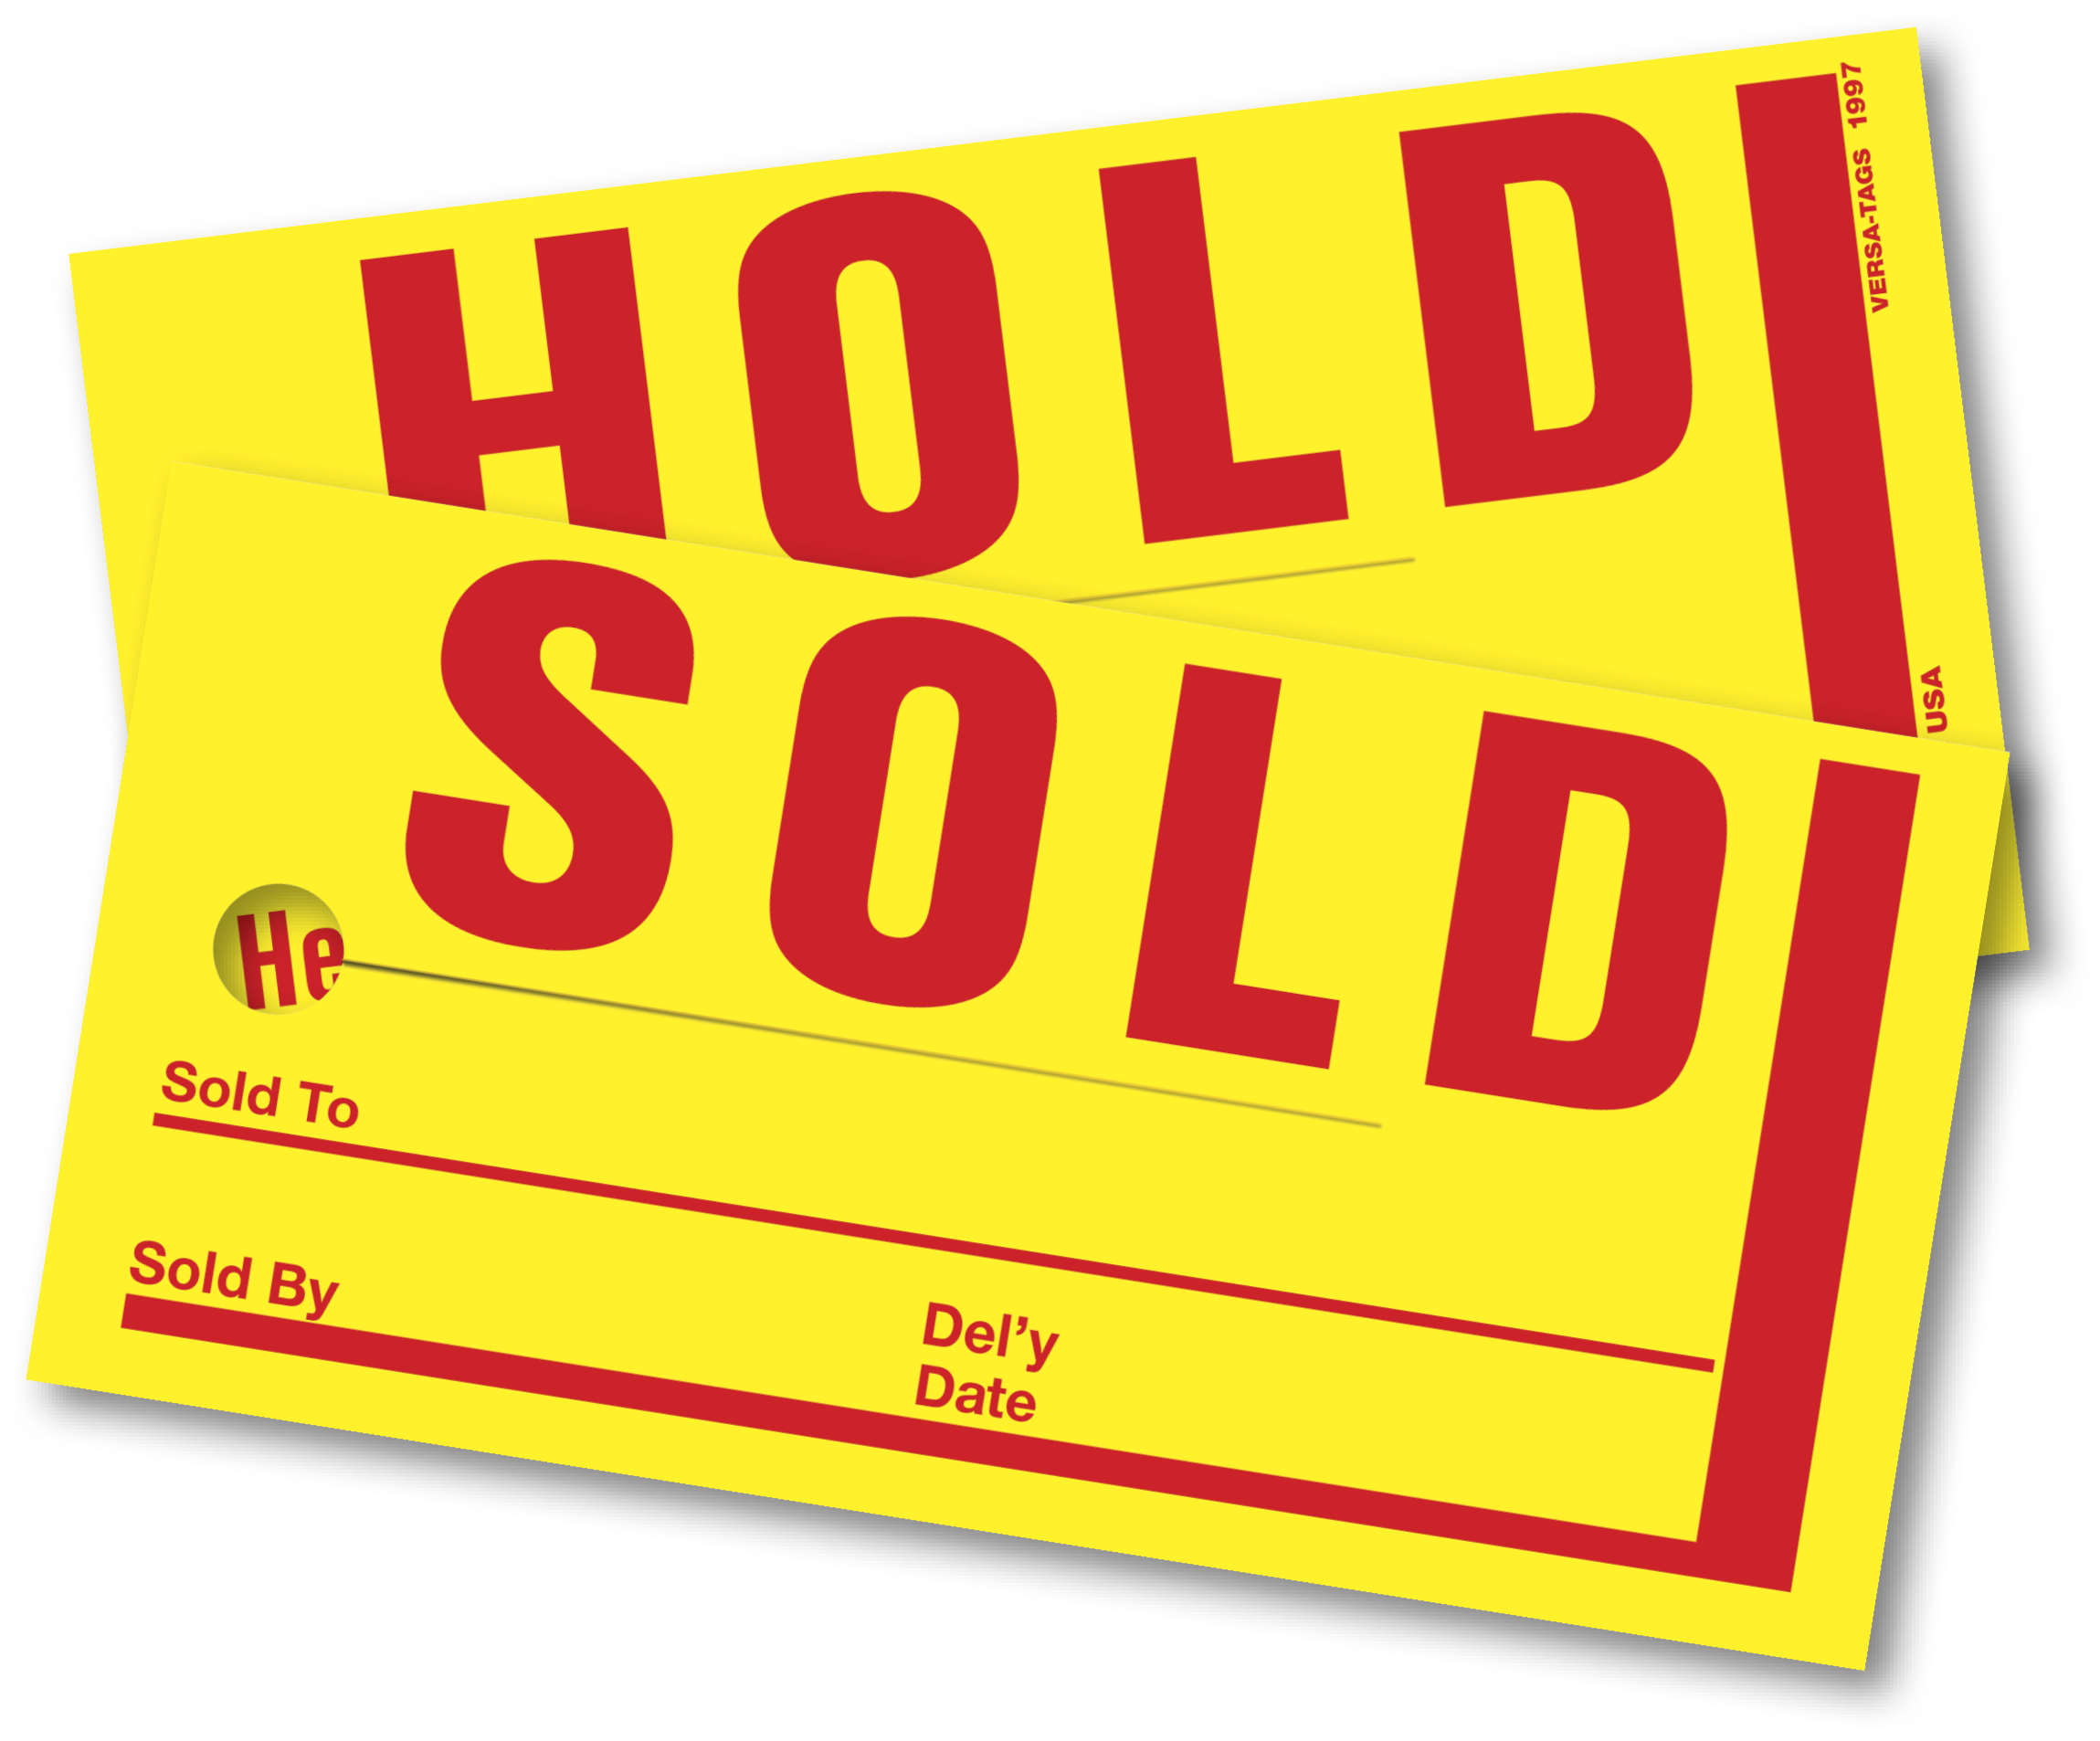 SOLD HOLD TAGS (4 in. x 8 in.)